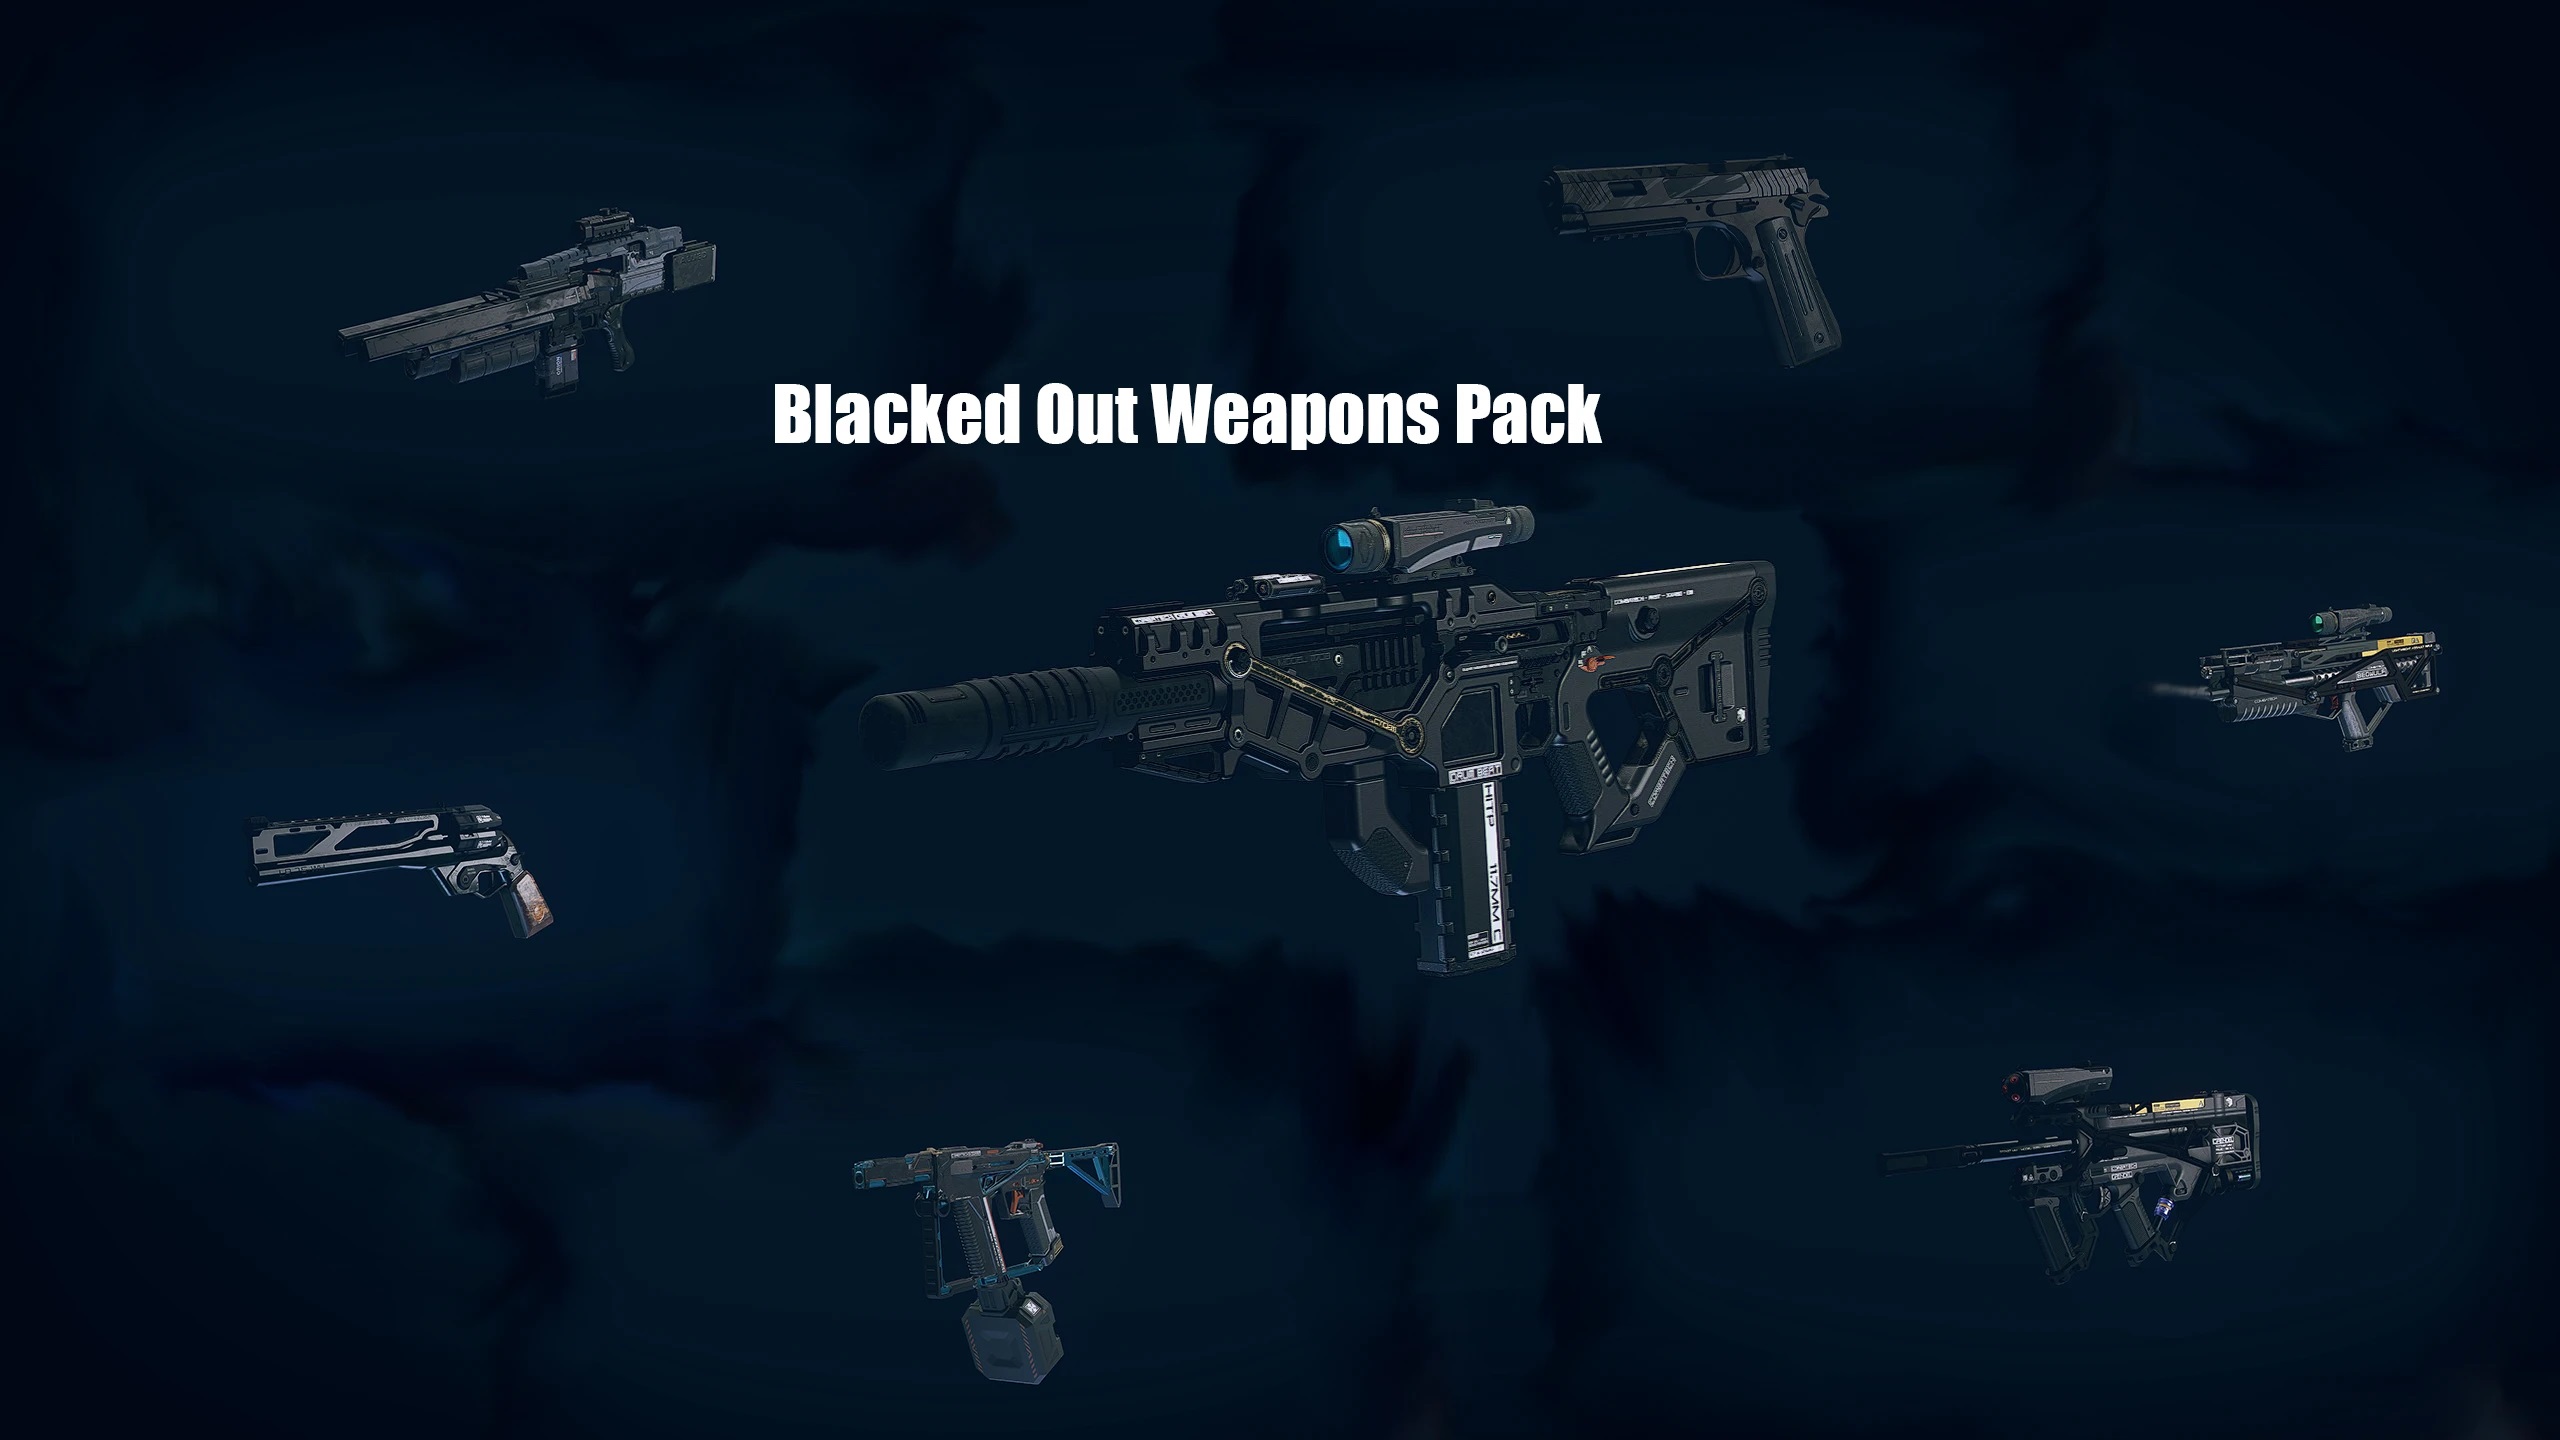 Blacked Out Weapons Pack